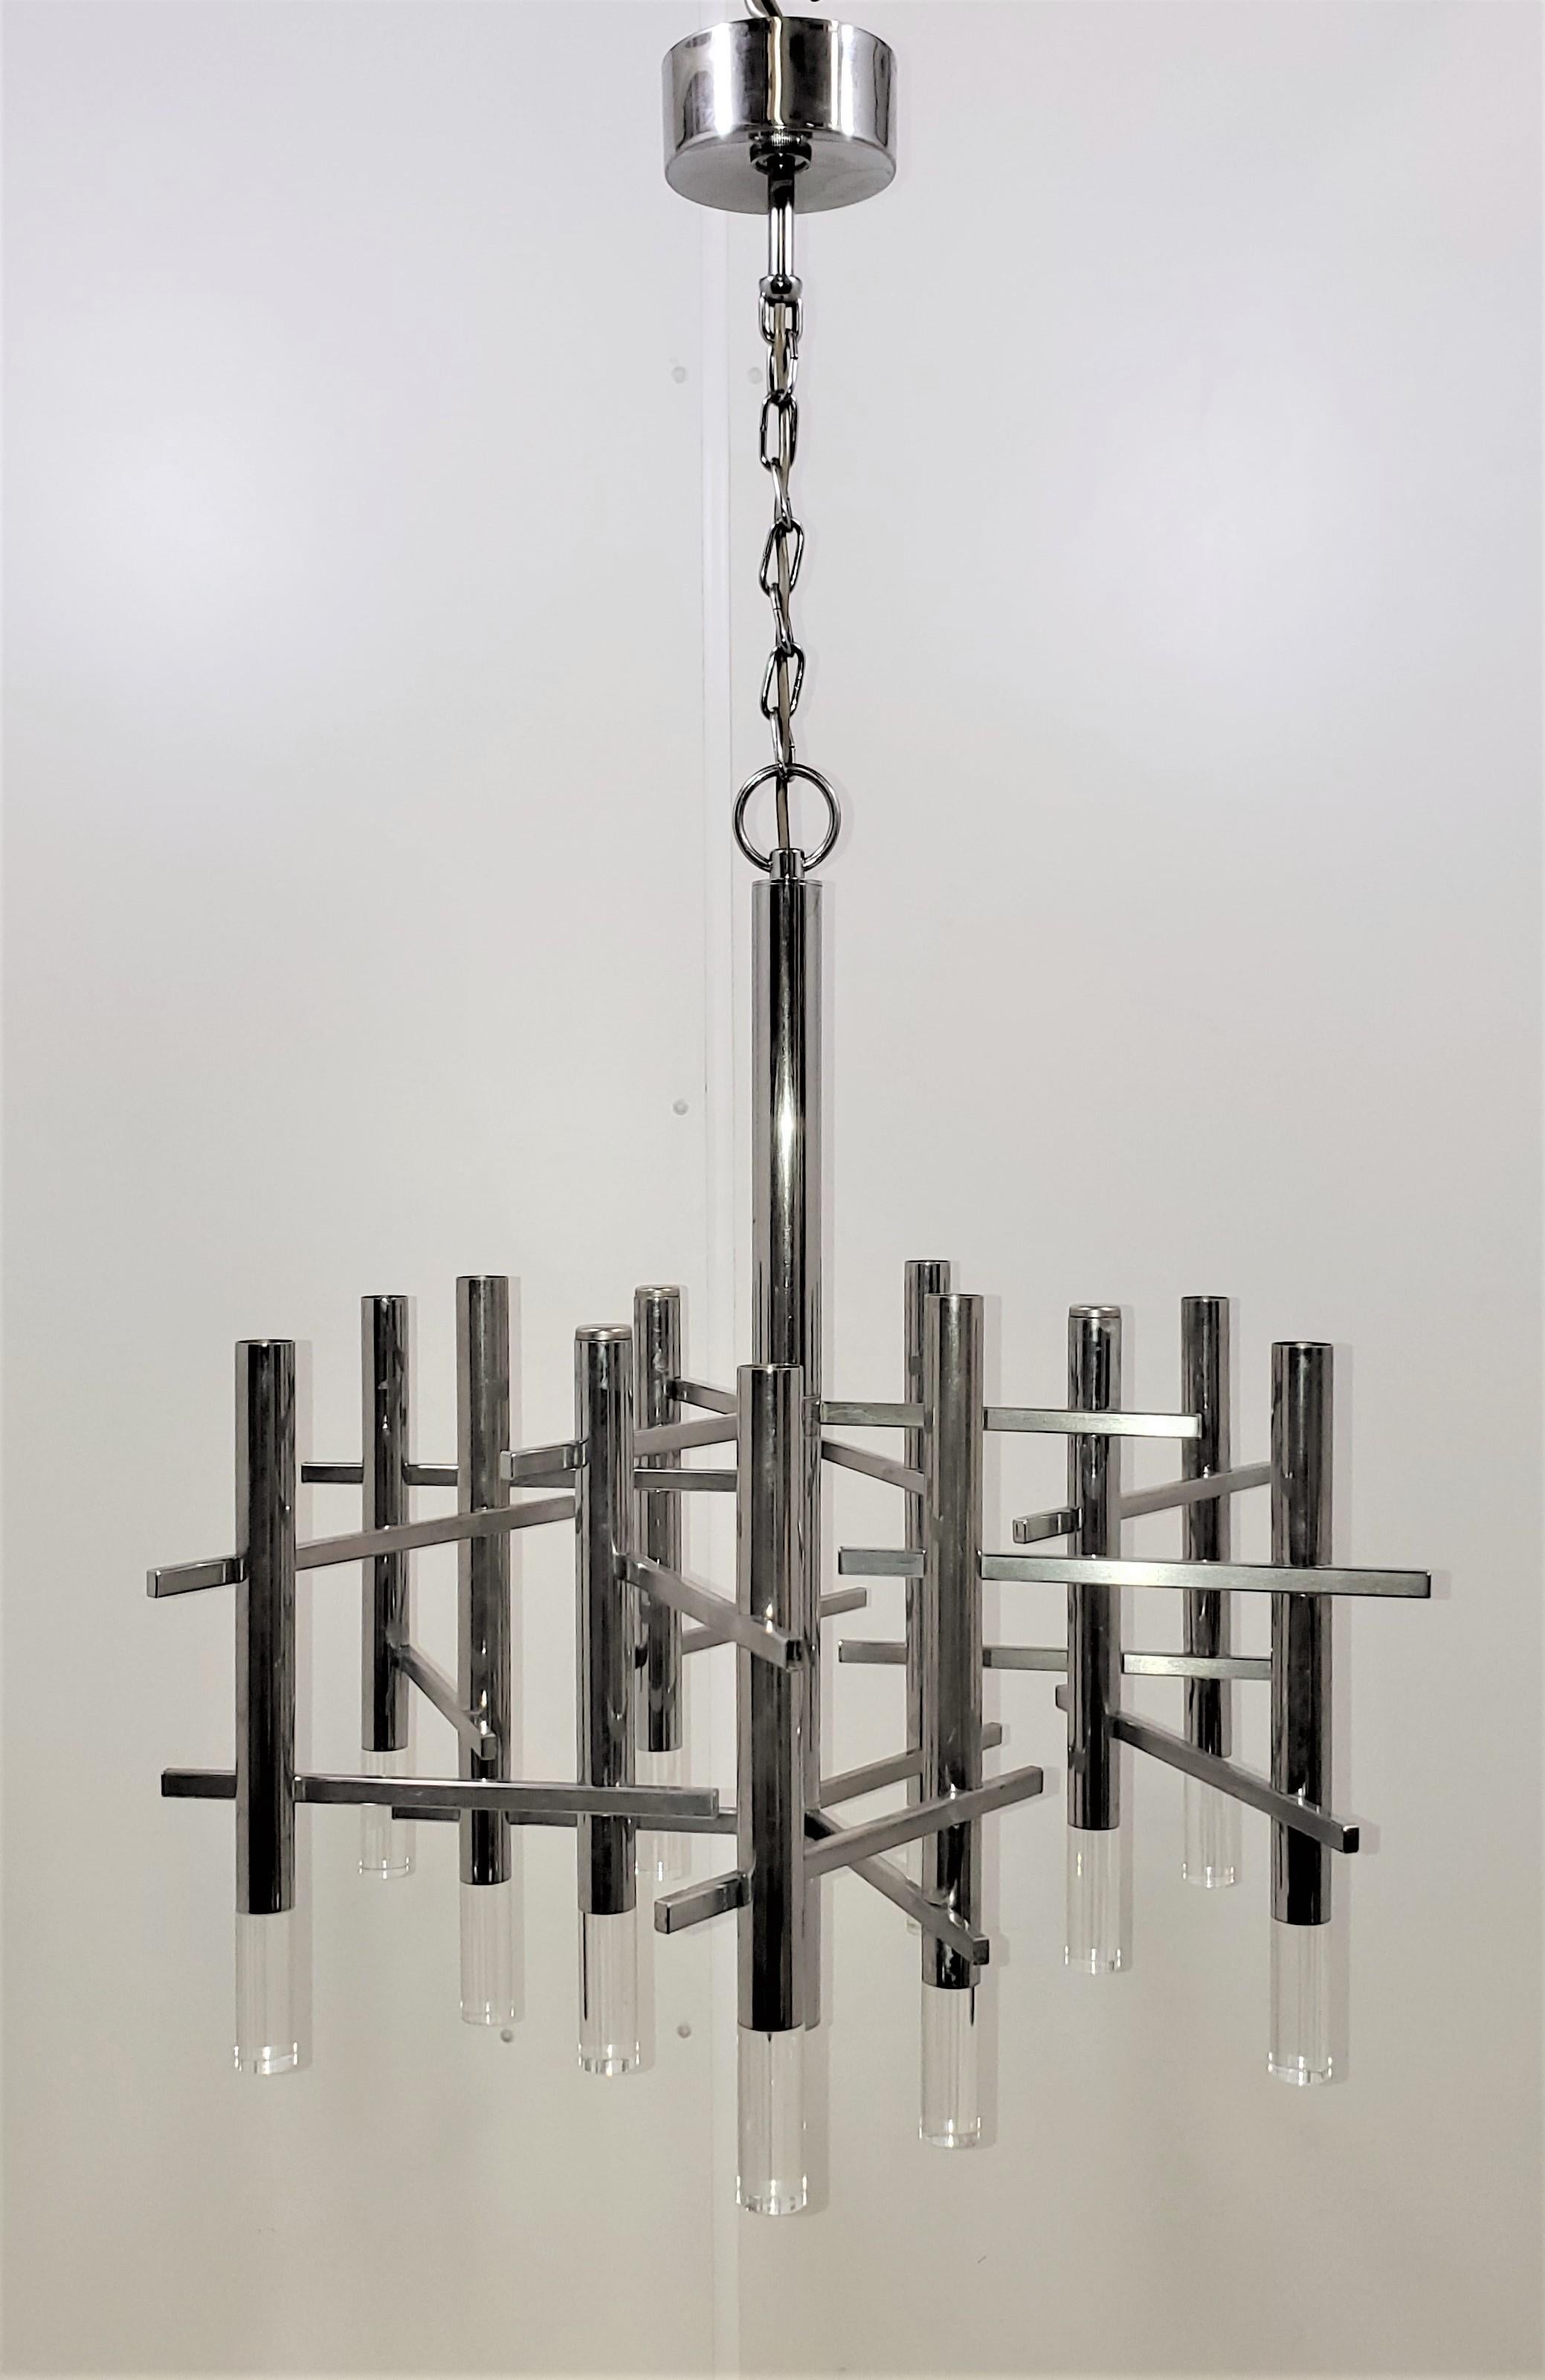 A dynamic and kinetic Mid-Century Modernist/ Space Age chandelier in chrome and lucite by Gaetano Sciolari.
The total height can be shortened to ~31